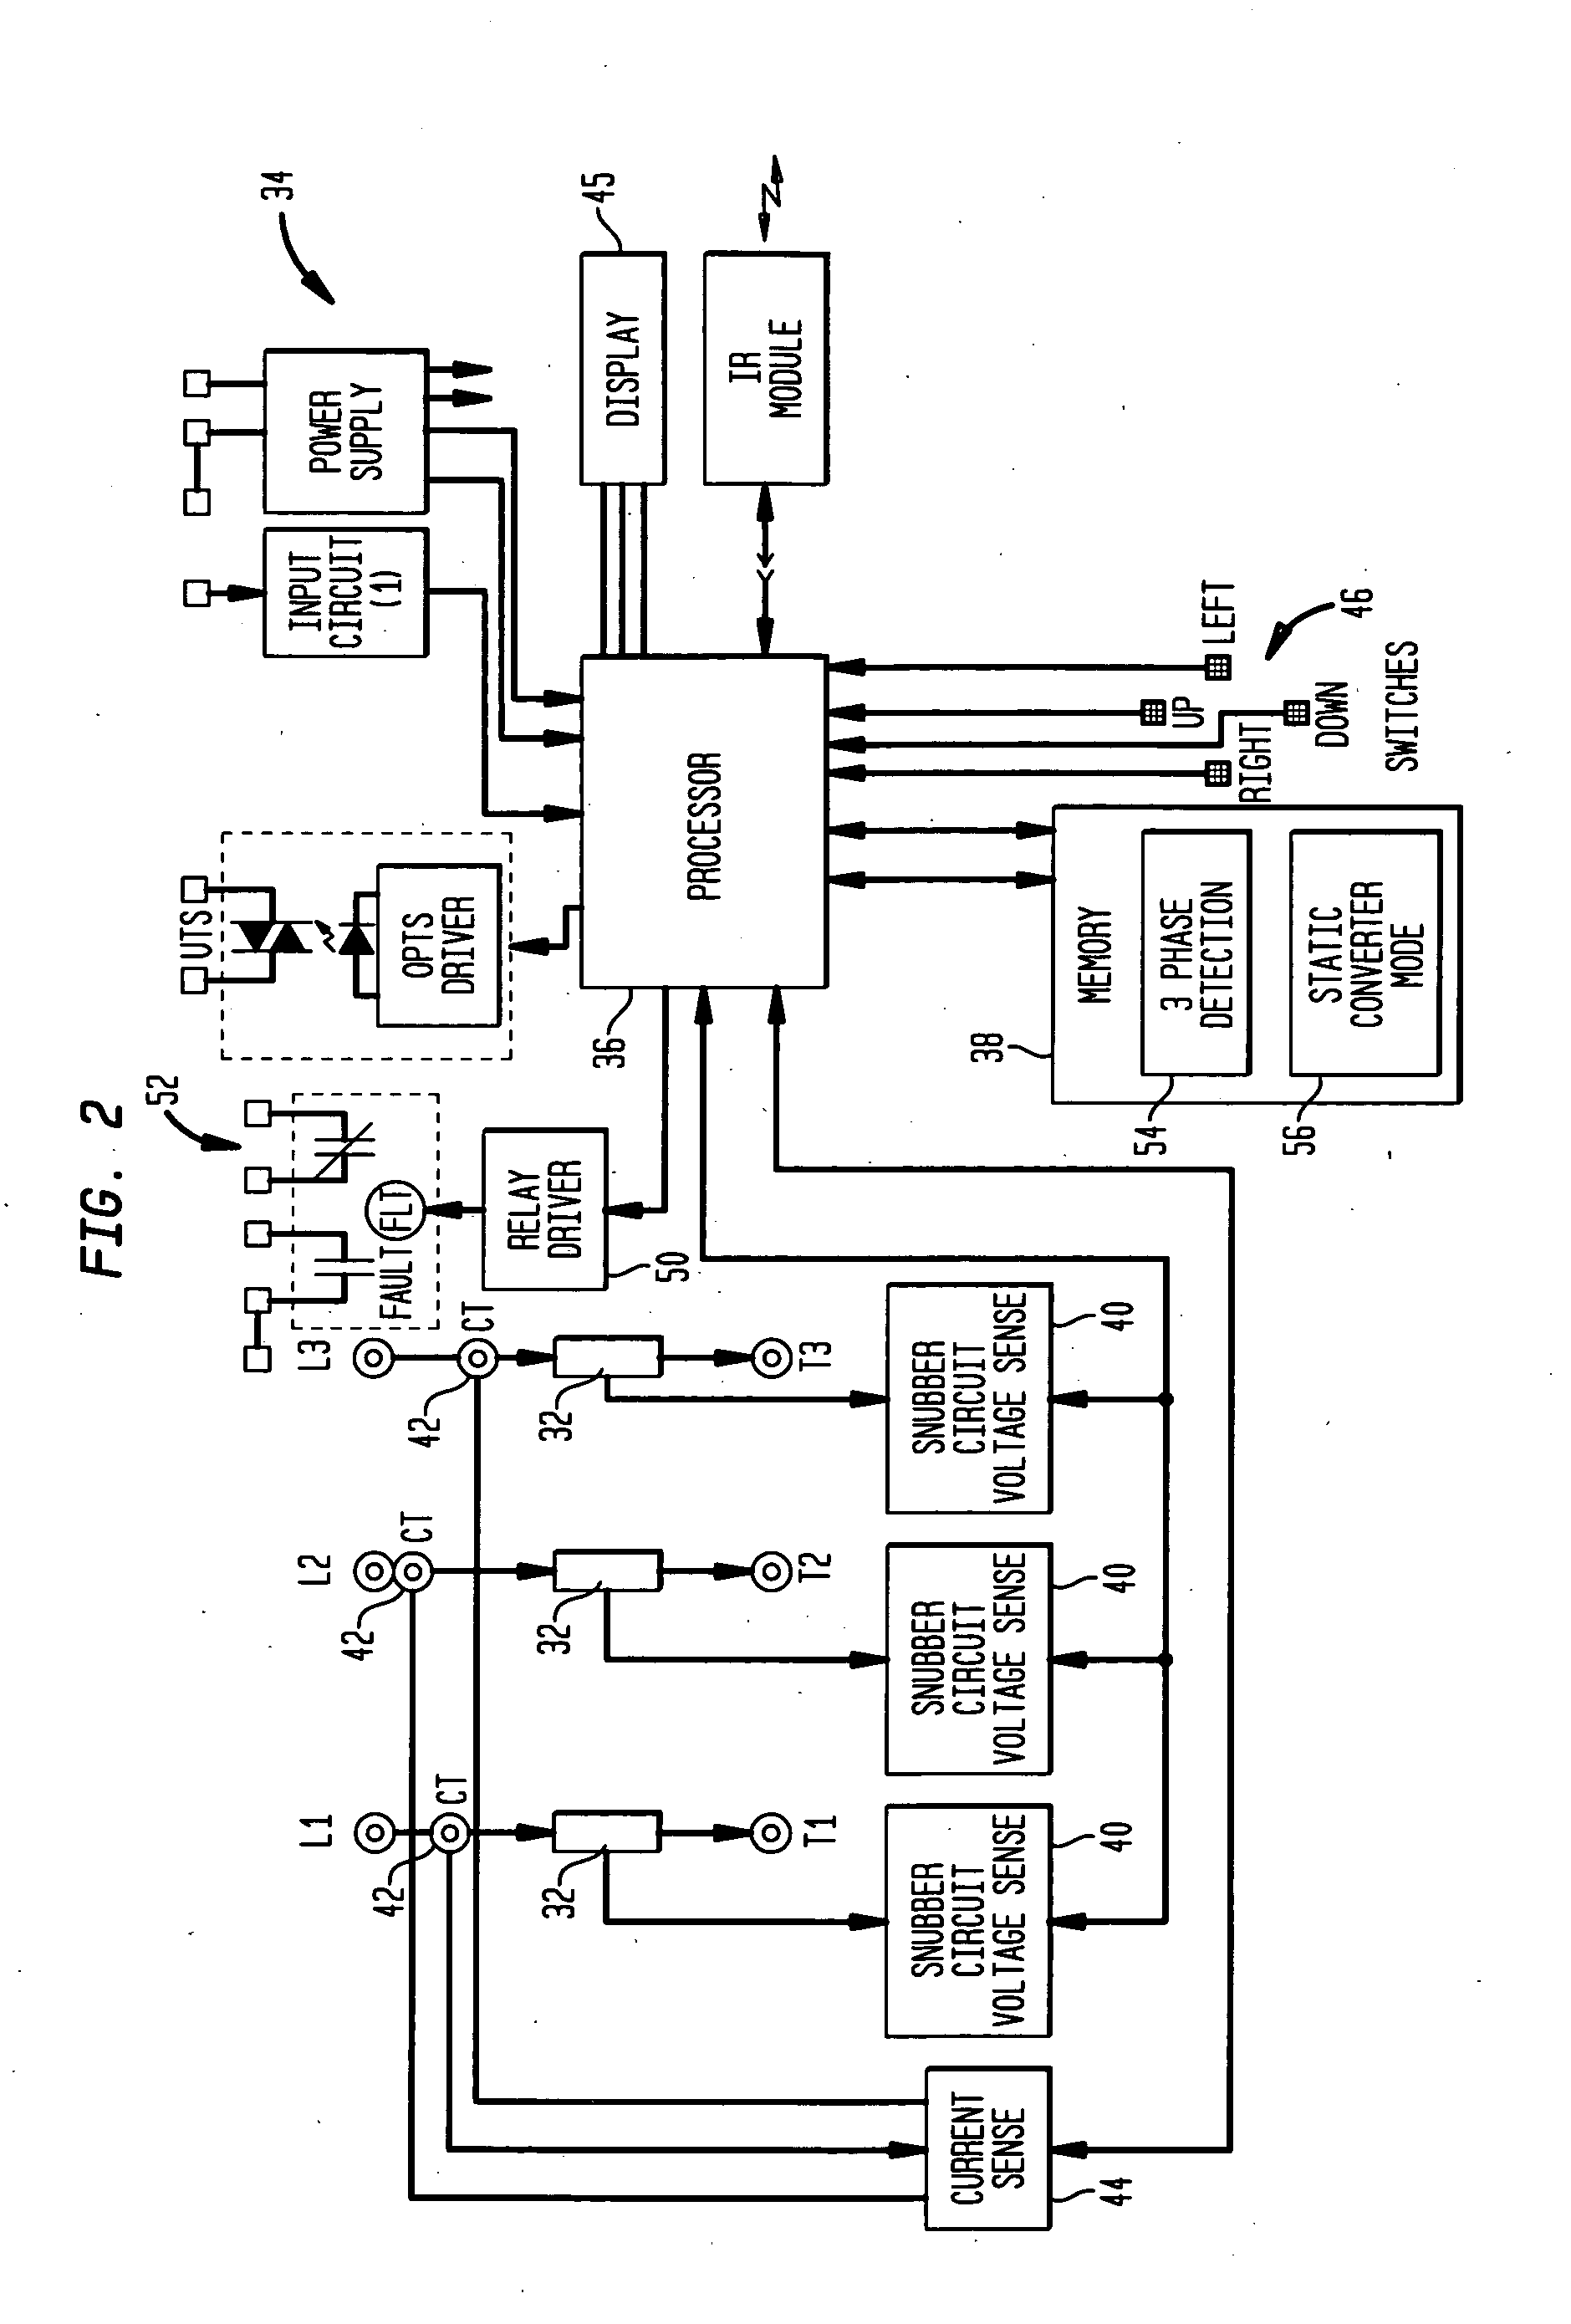 System and method for operating a soft starter in conjunction with a single to three phase static converter